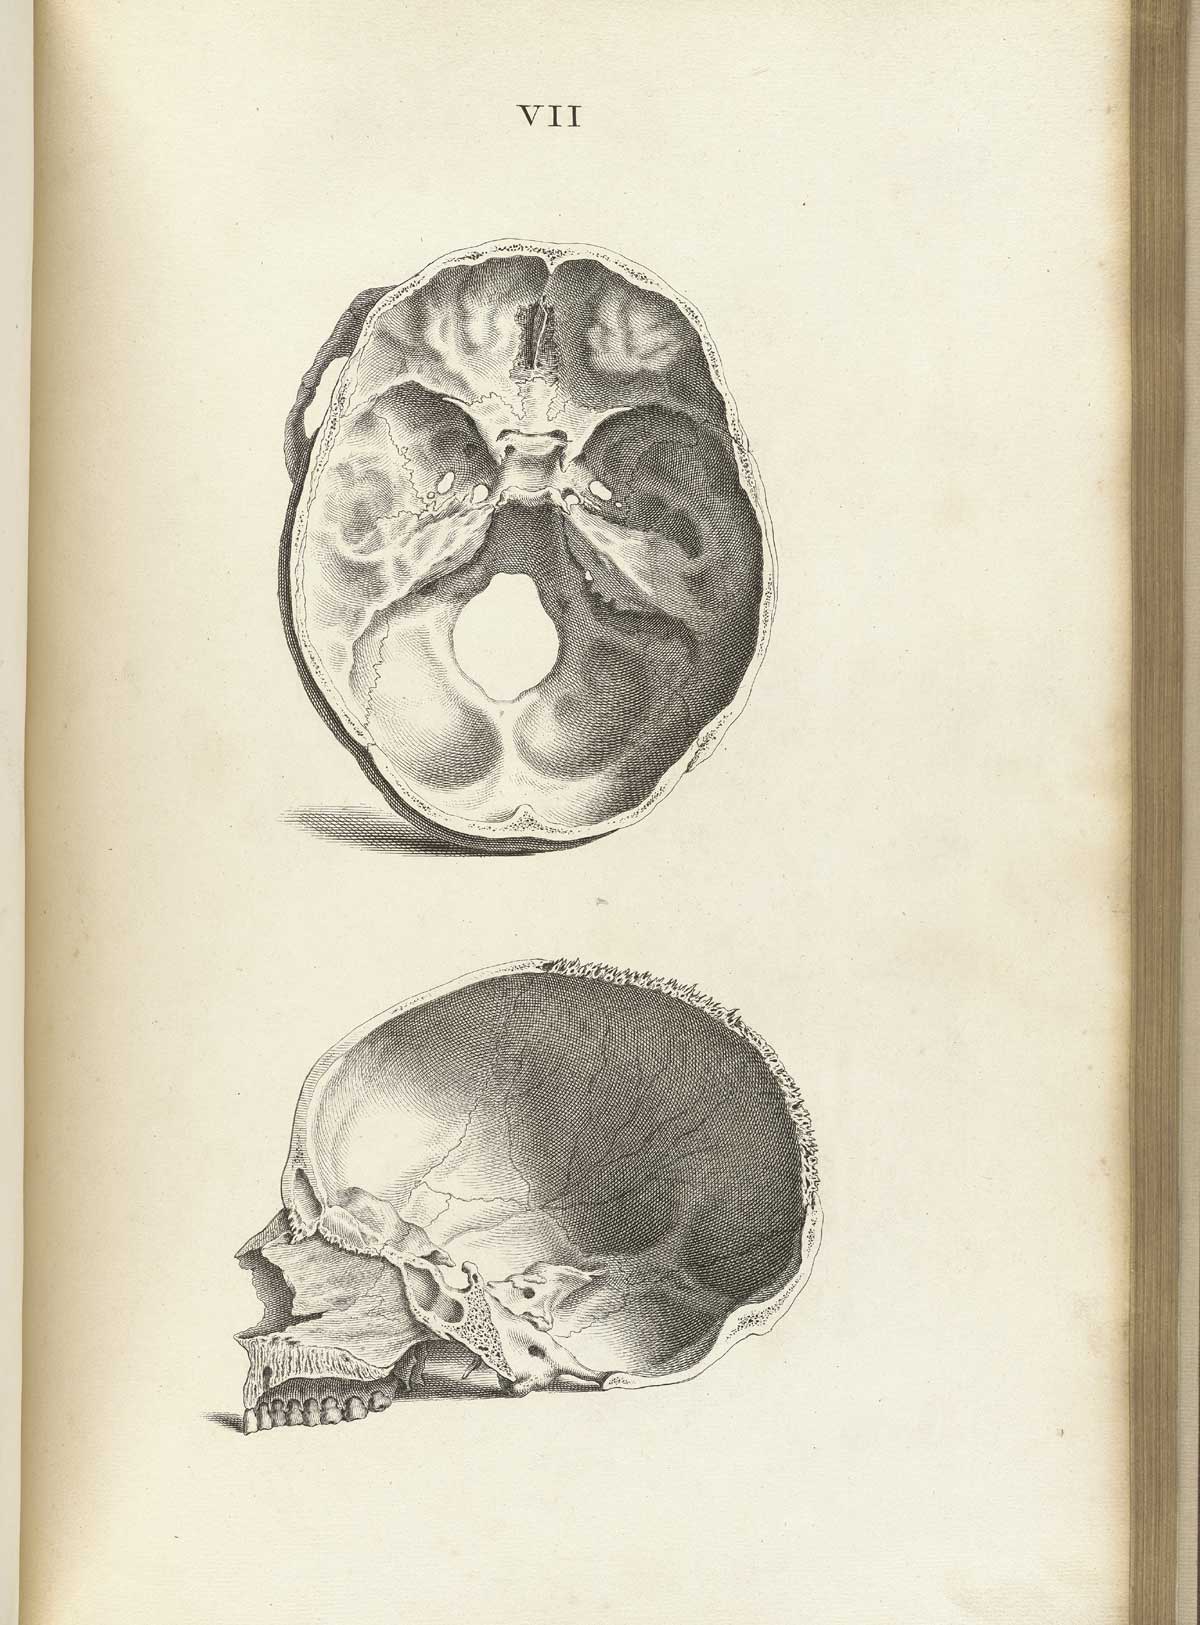 Engraving of two cross-sections of human skulls, the upper one a horizontal cross-section with an interior view of the bottom half of the skull with views of the occipital bone and foramen magnum, and the lower one a vertical cross-section with interior view of the sinus cavities, palate and neurocranium, from William Cheselden’s Osteographia, NLM Call no.: WZ 260 C499o 1733.